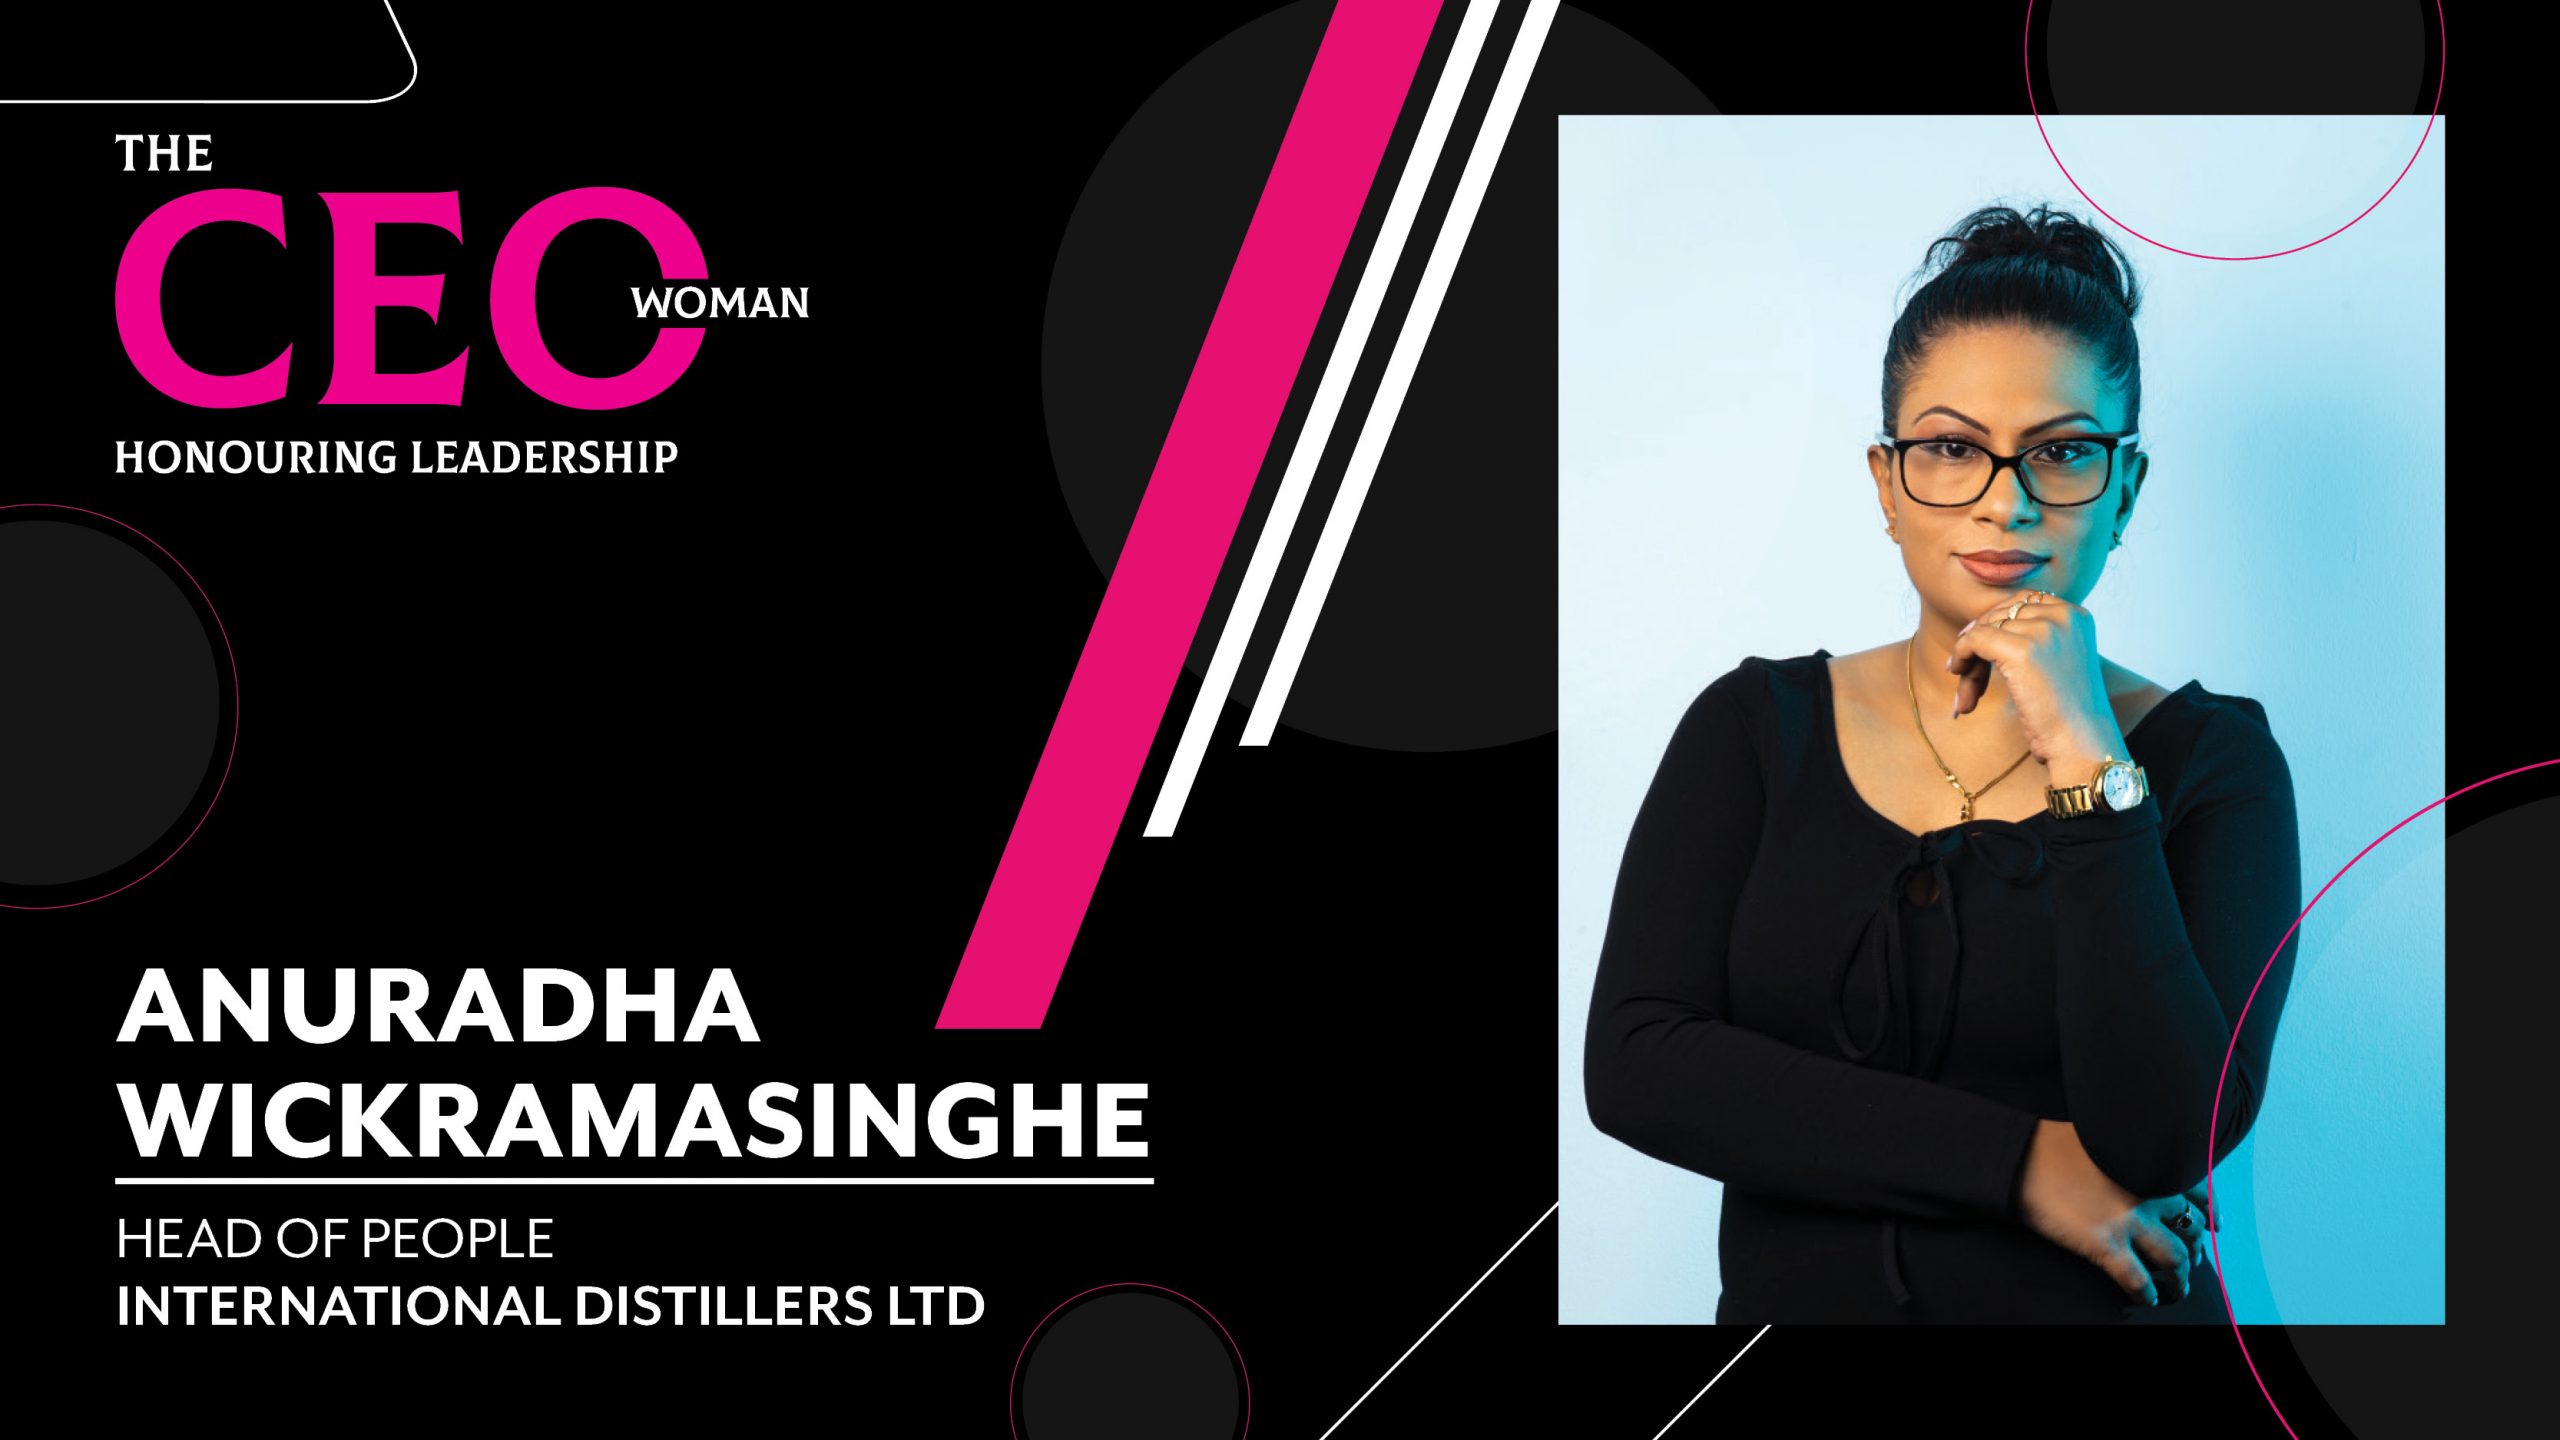 Reflecting Excellence through Unique Significance  – Head of People at International Distillers Ltd, Anuradha Wickramasinghe